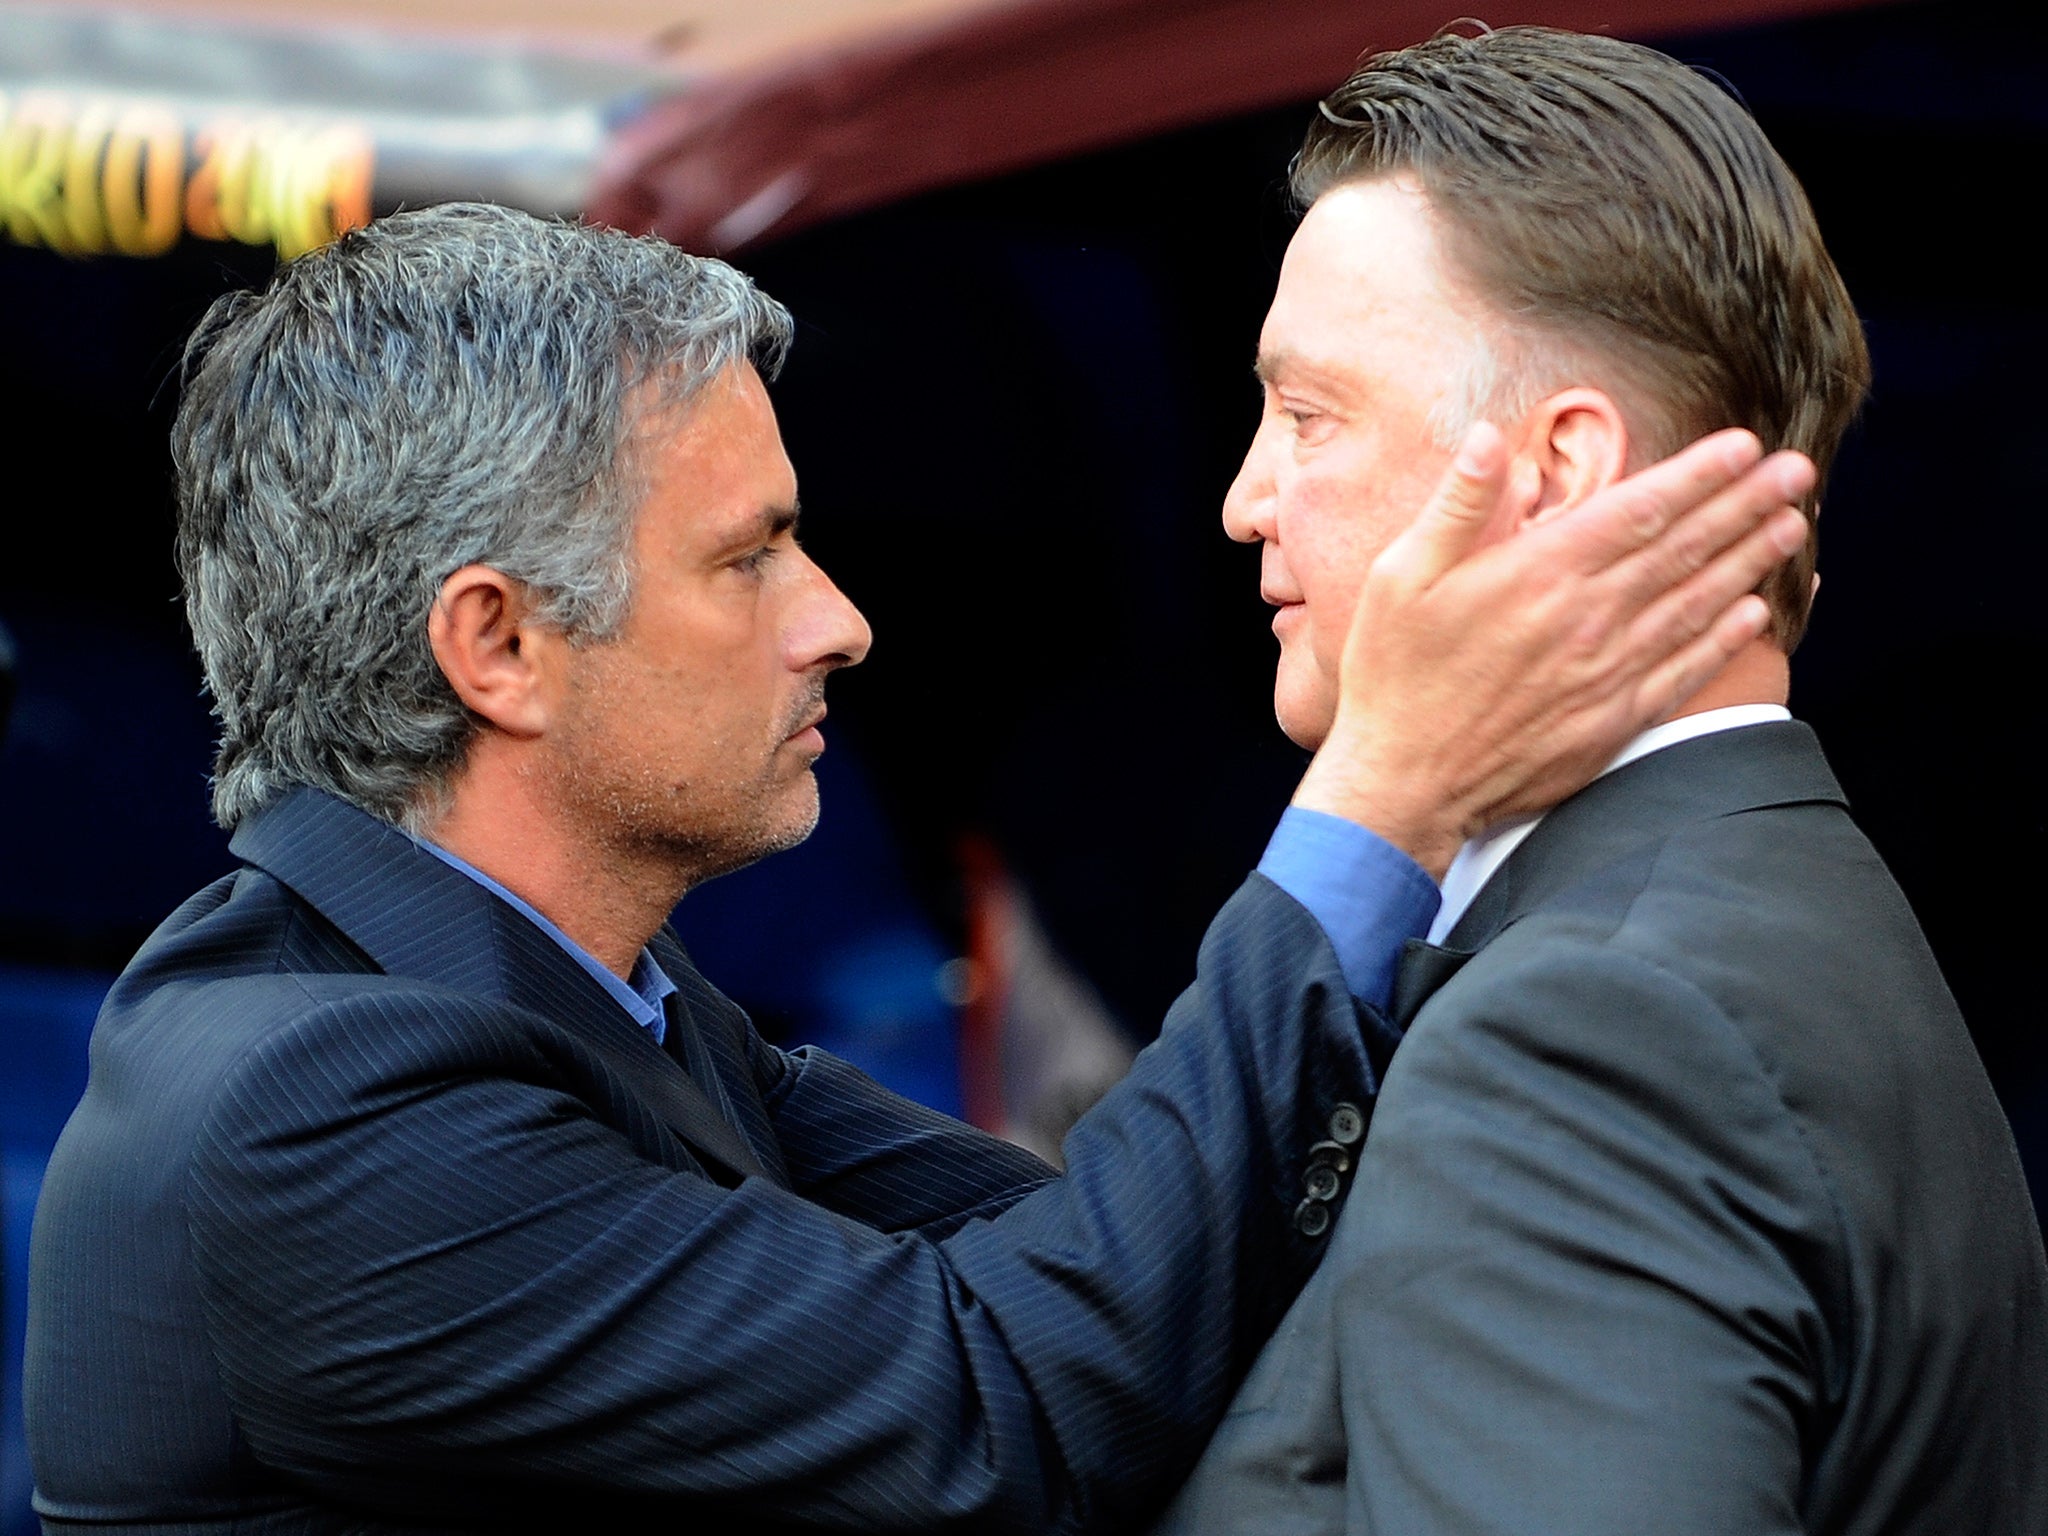 Mourinho and Van Gaal were thought to be friends off-the-pitch